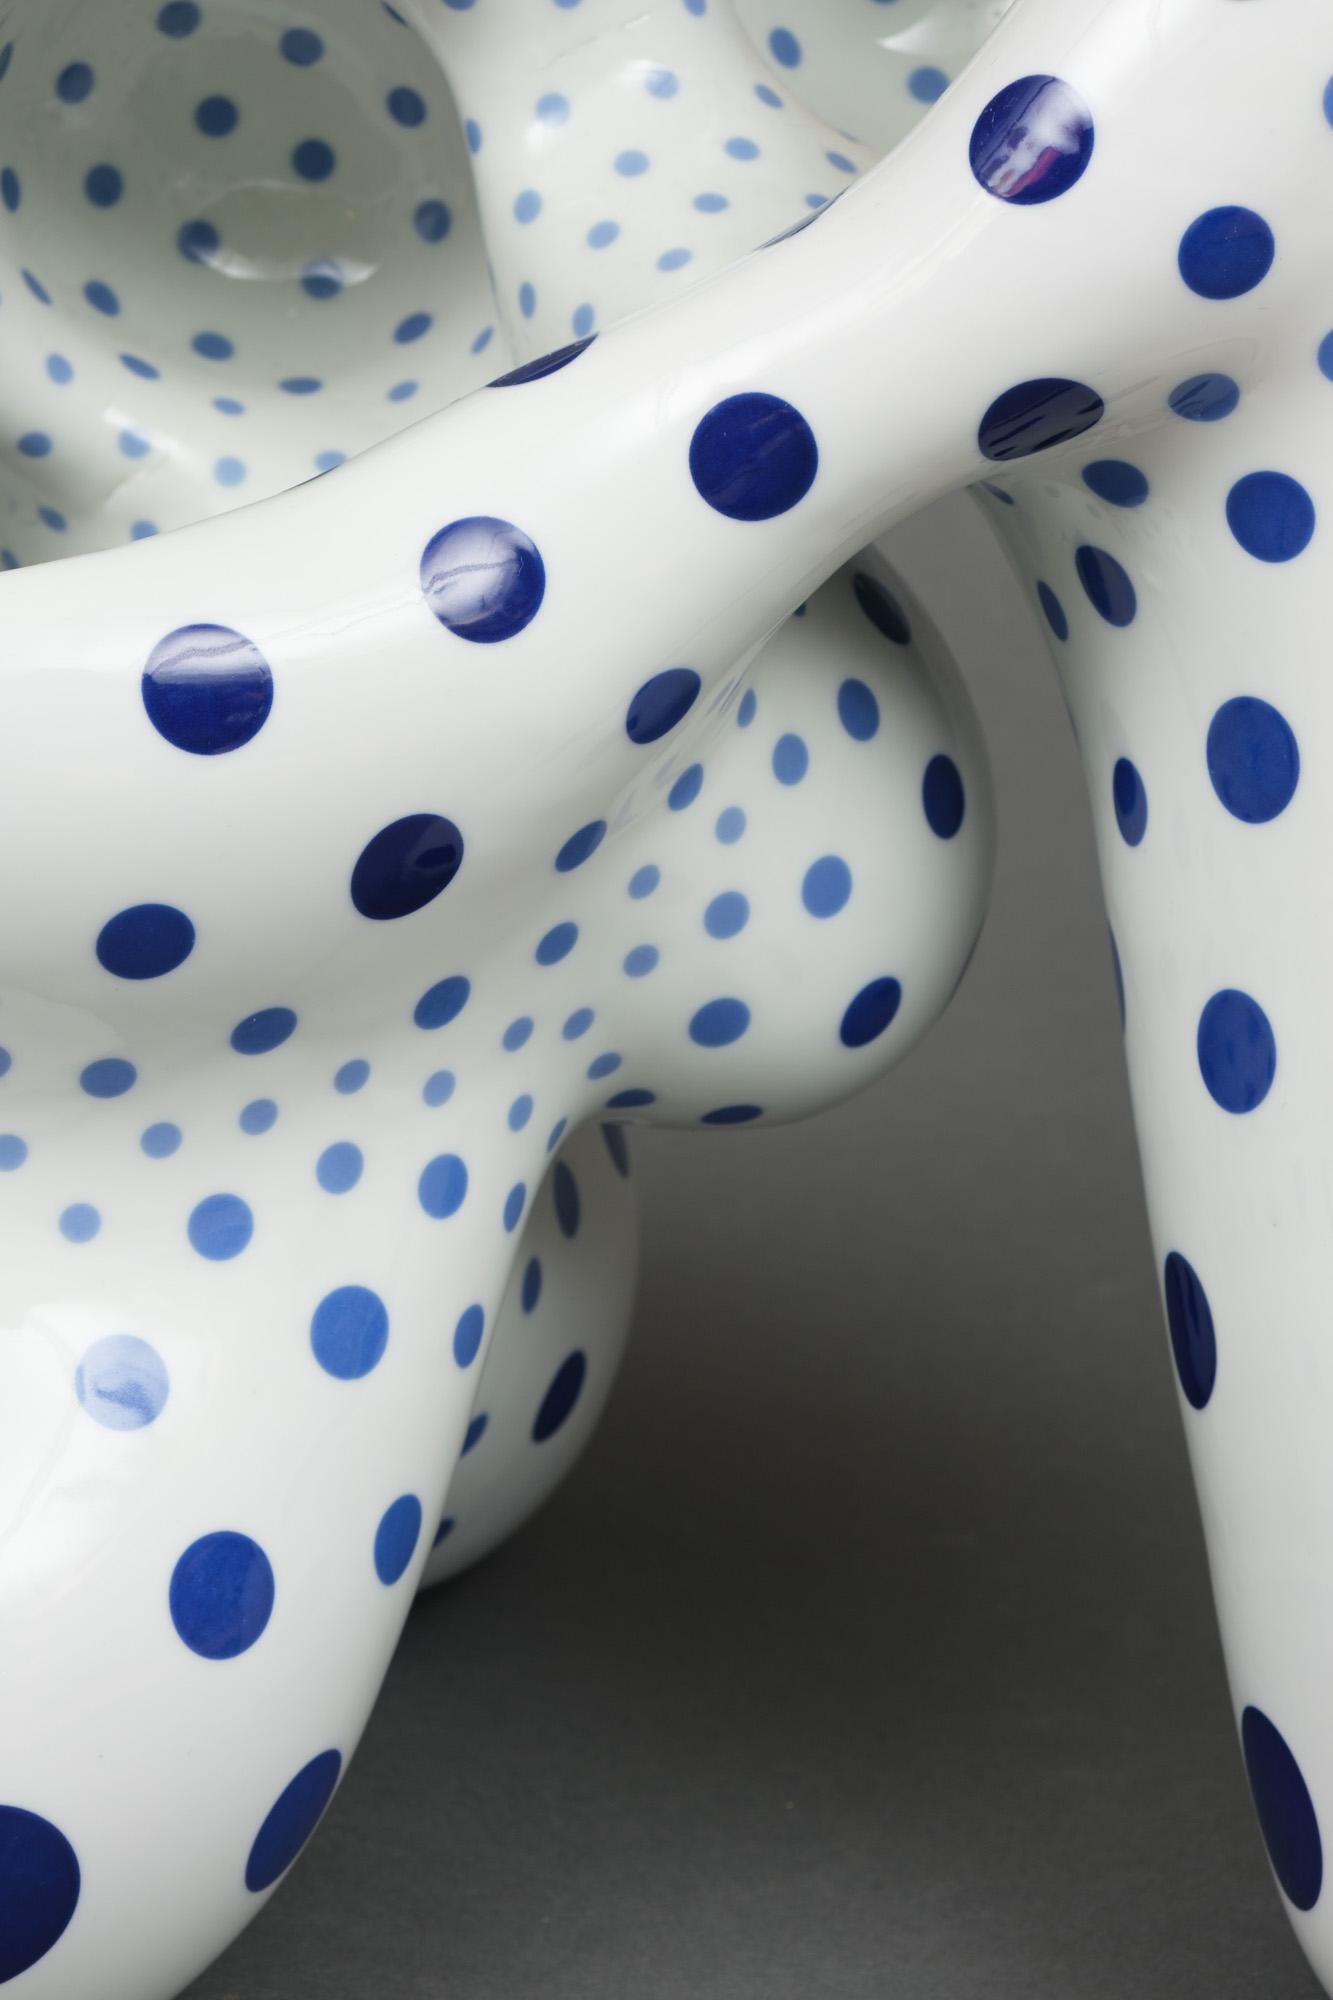 Porcelain Outstanding Japanese Biomorphic Abstract Sculpture by Harumi Nakashima 中島晴美